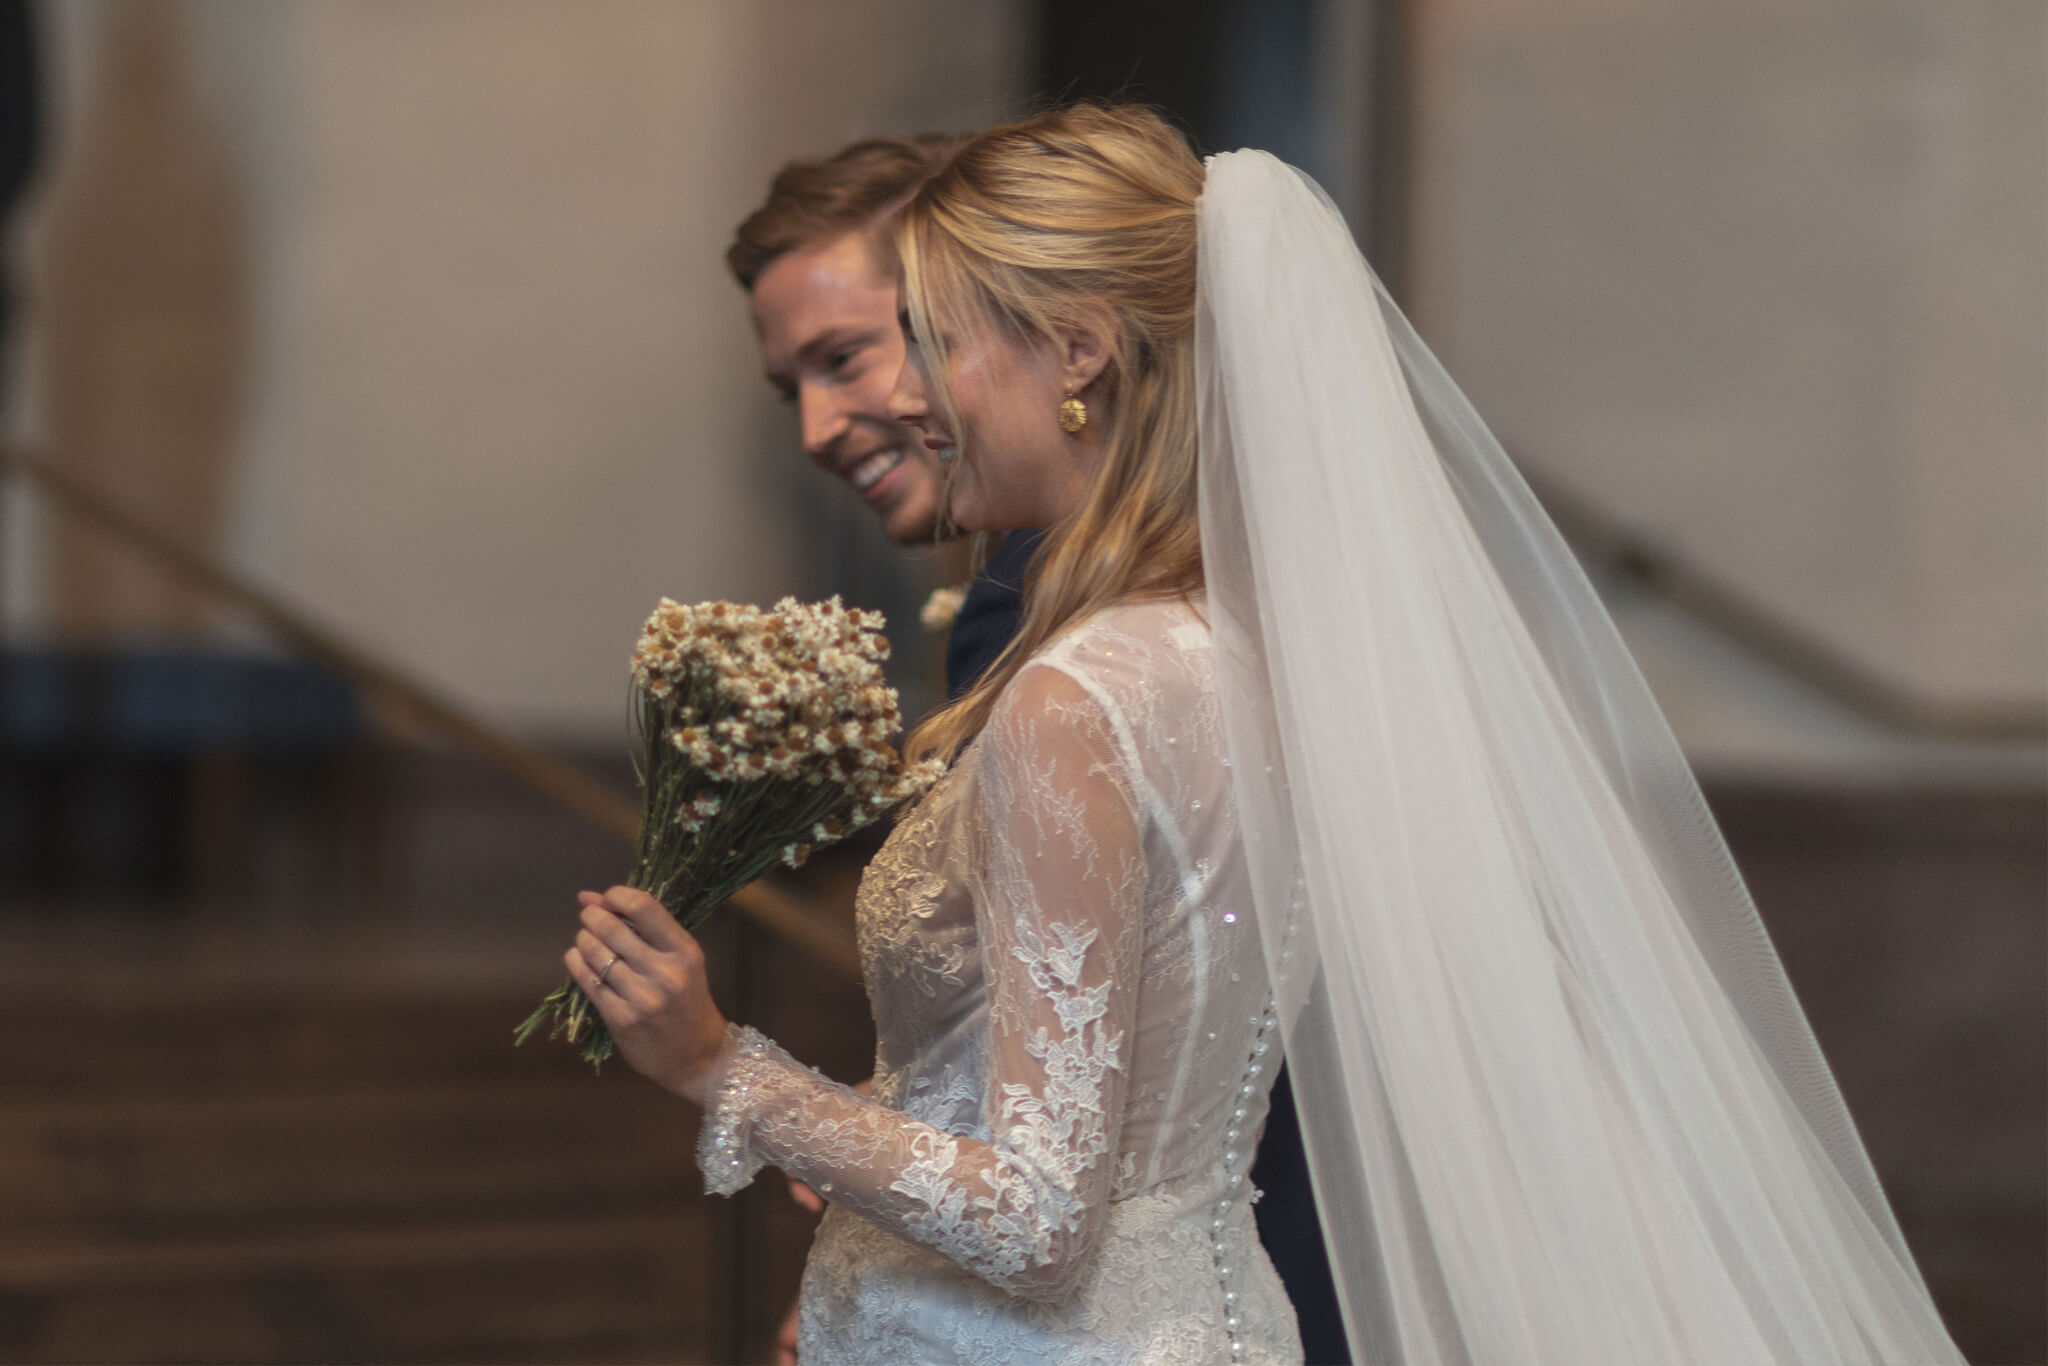 Their Smiles Said It All! Congratulations to the Newlyweds! 